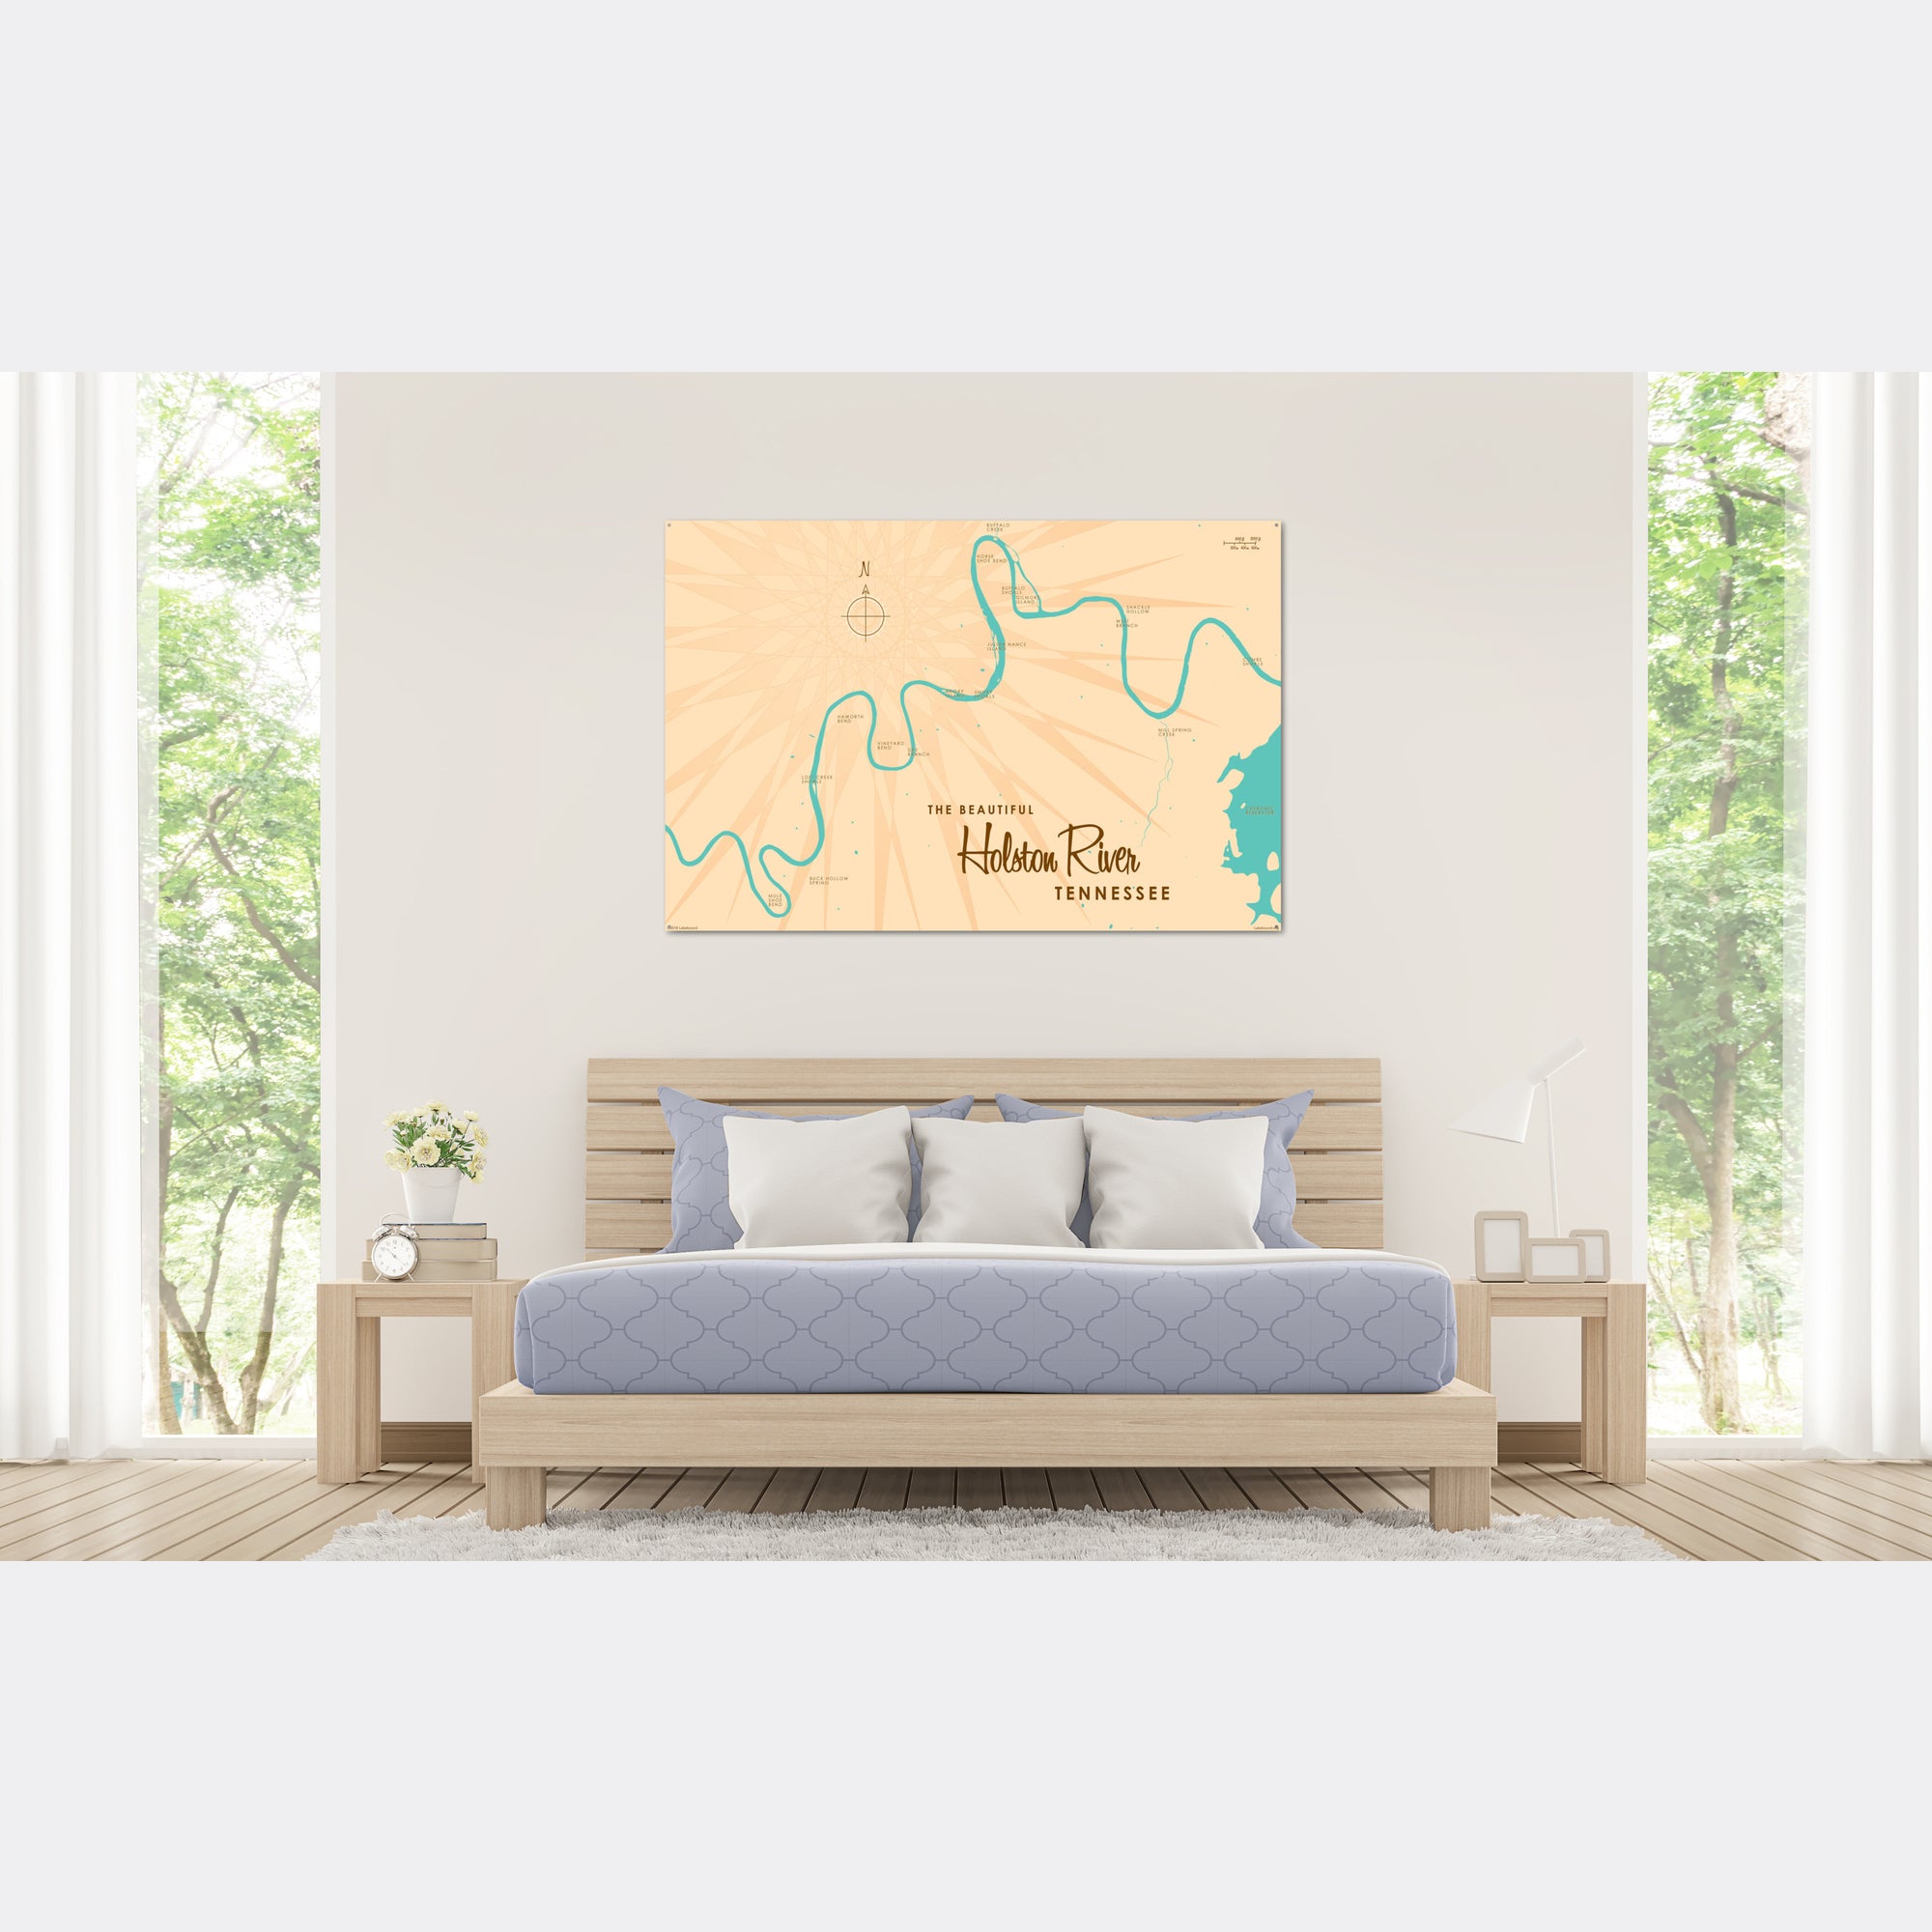 Holston River Tennessee, Metal Sign Map Art